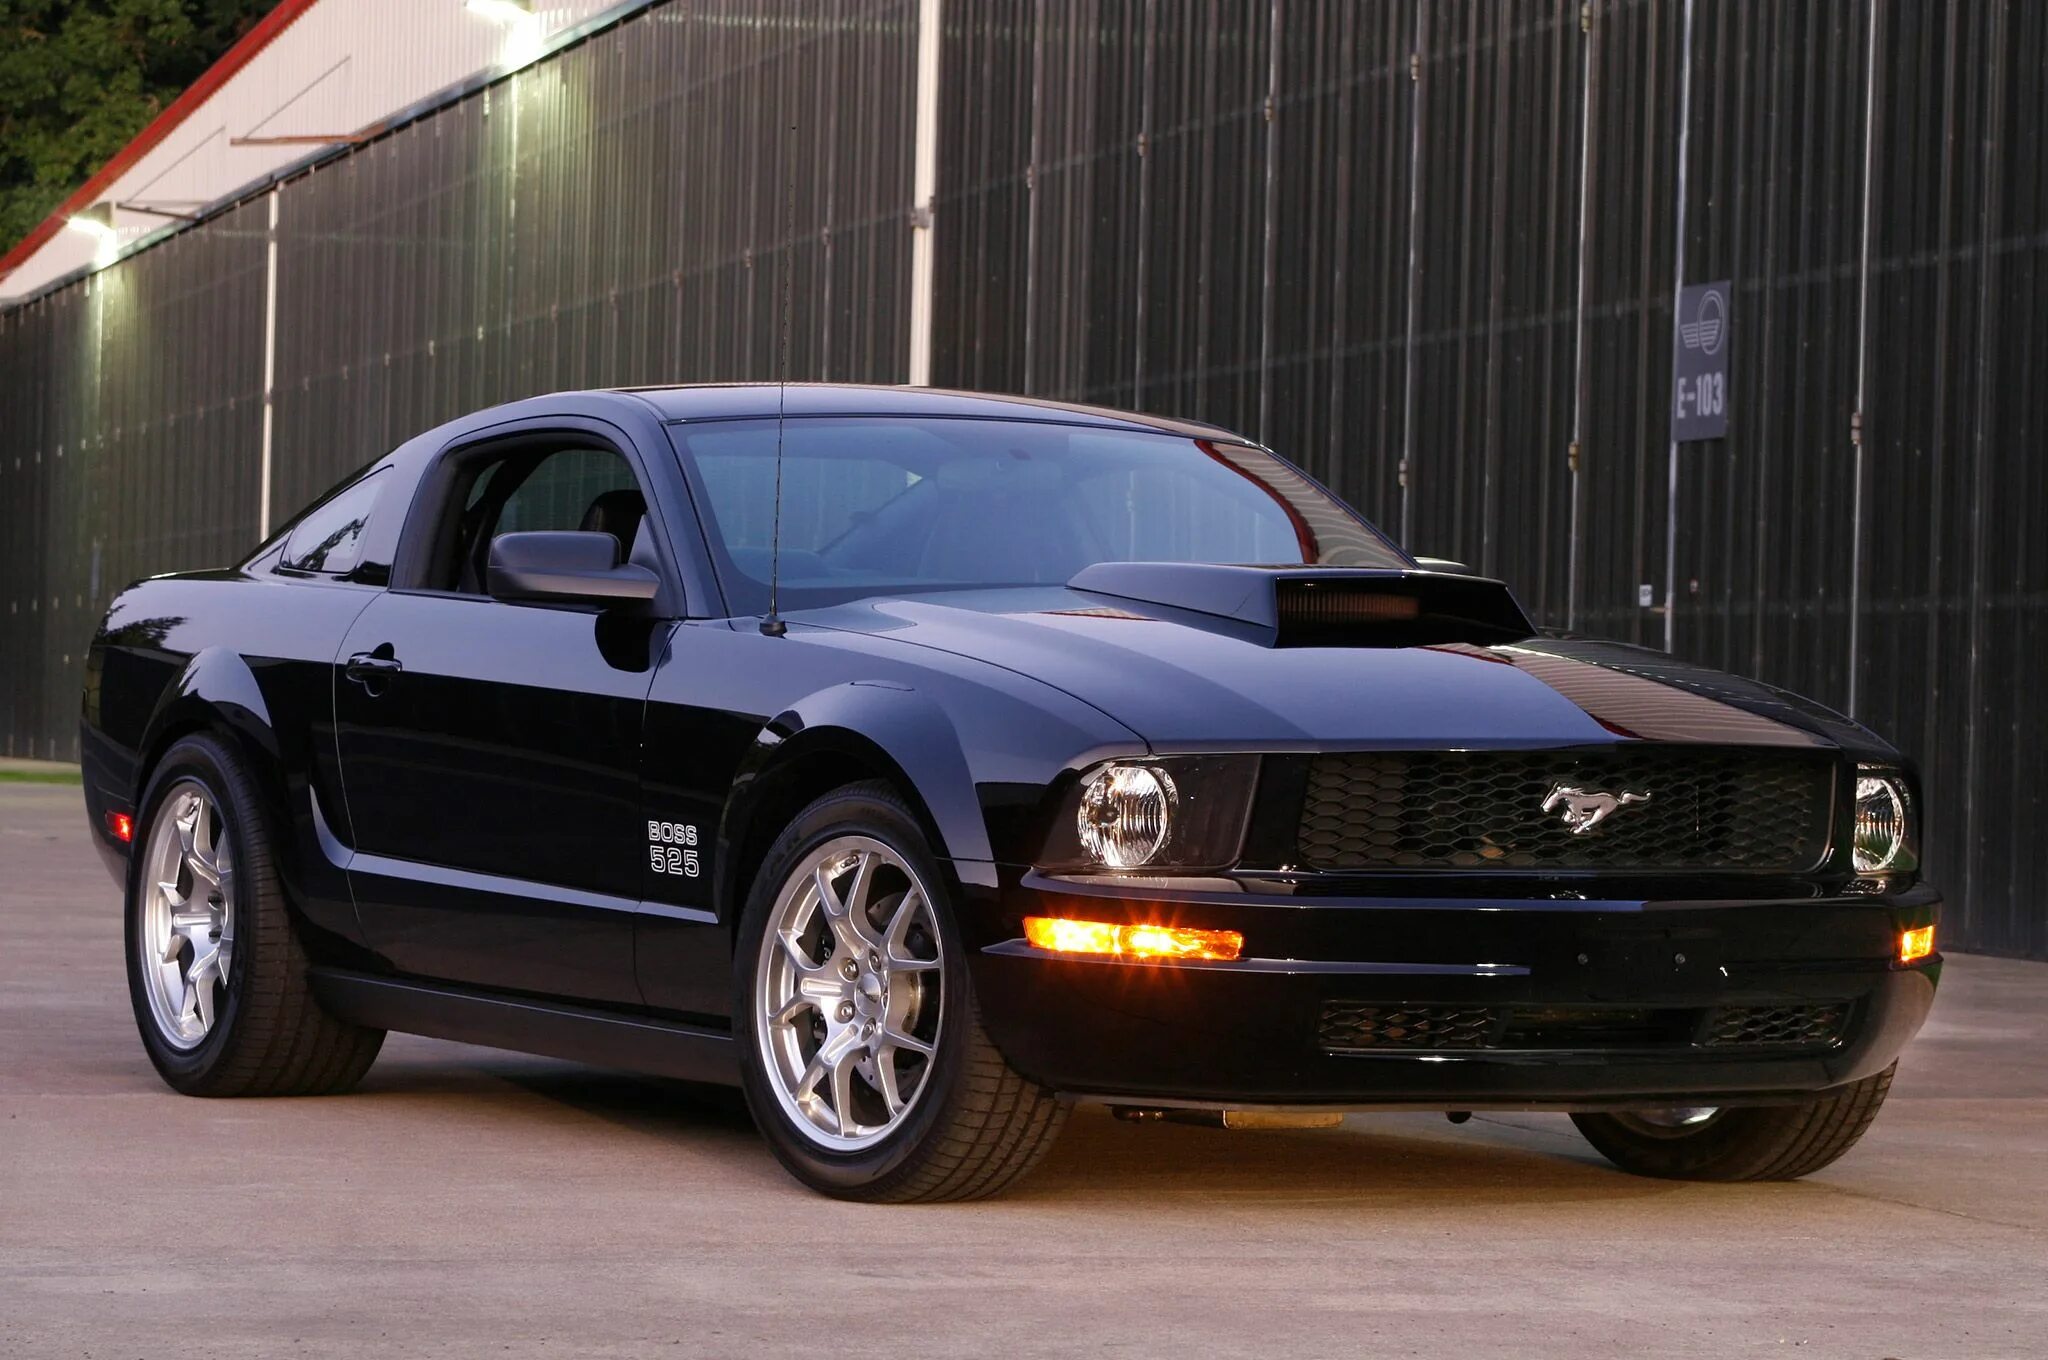 Продажа мустанг. Форд Мустанг ГТ 2005. Ford Mustang 2005. Ford Mustang Shelby 2005. Ford Mustang 2005 Boss.